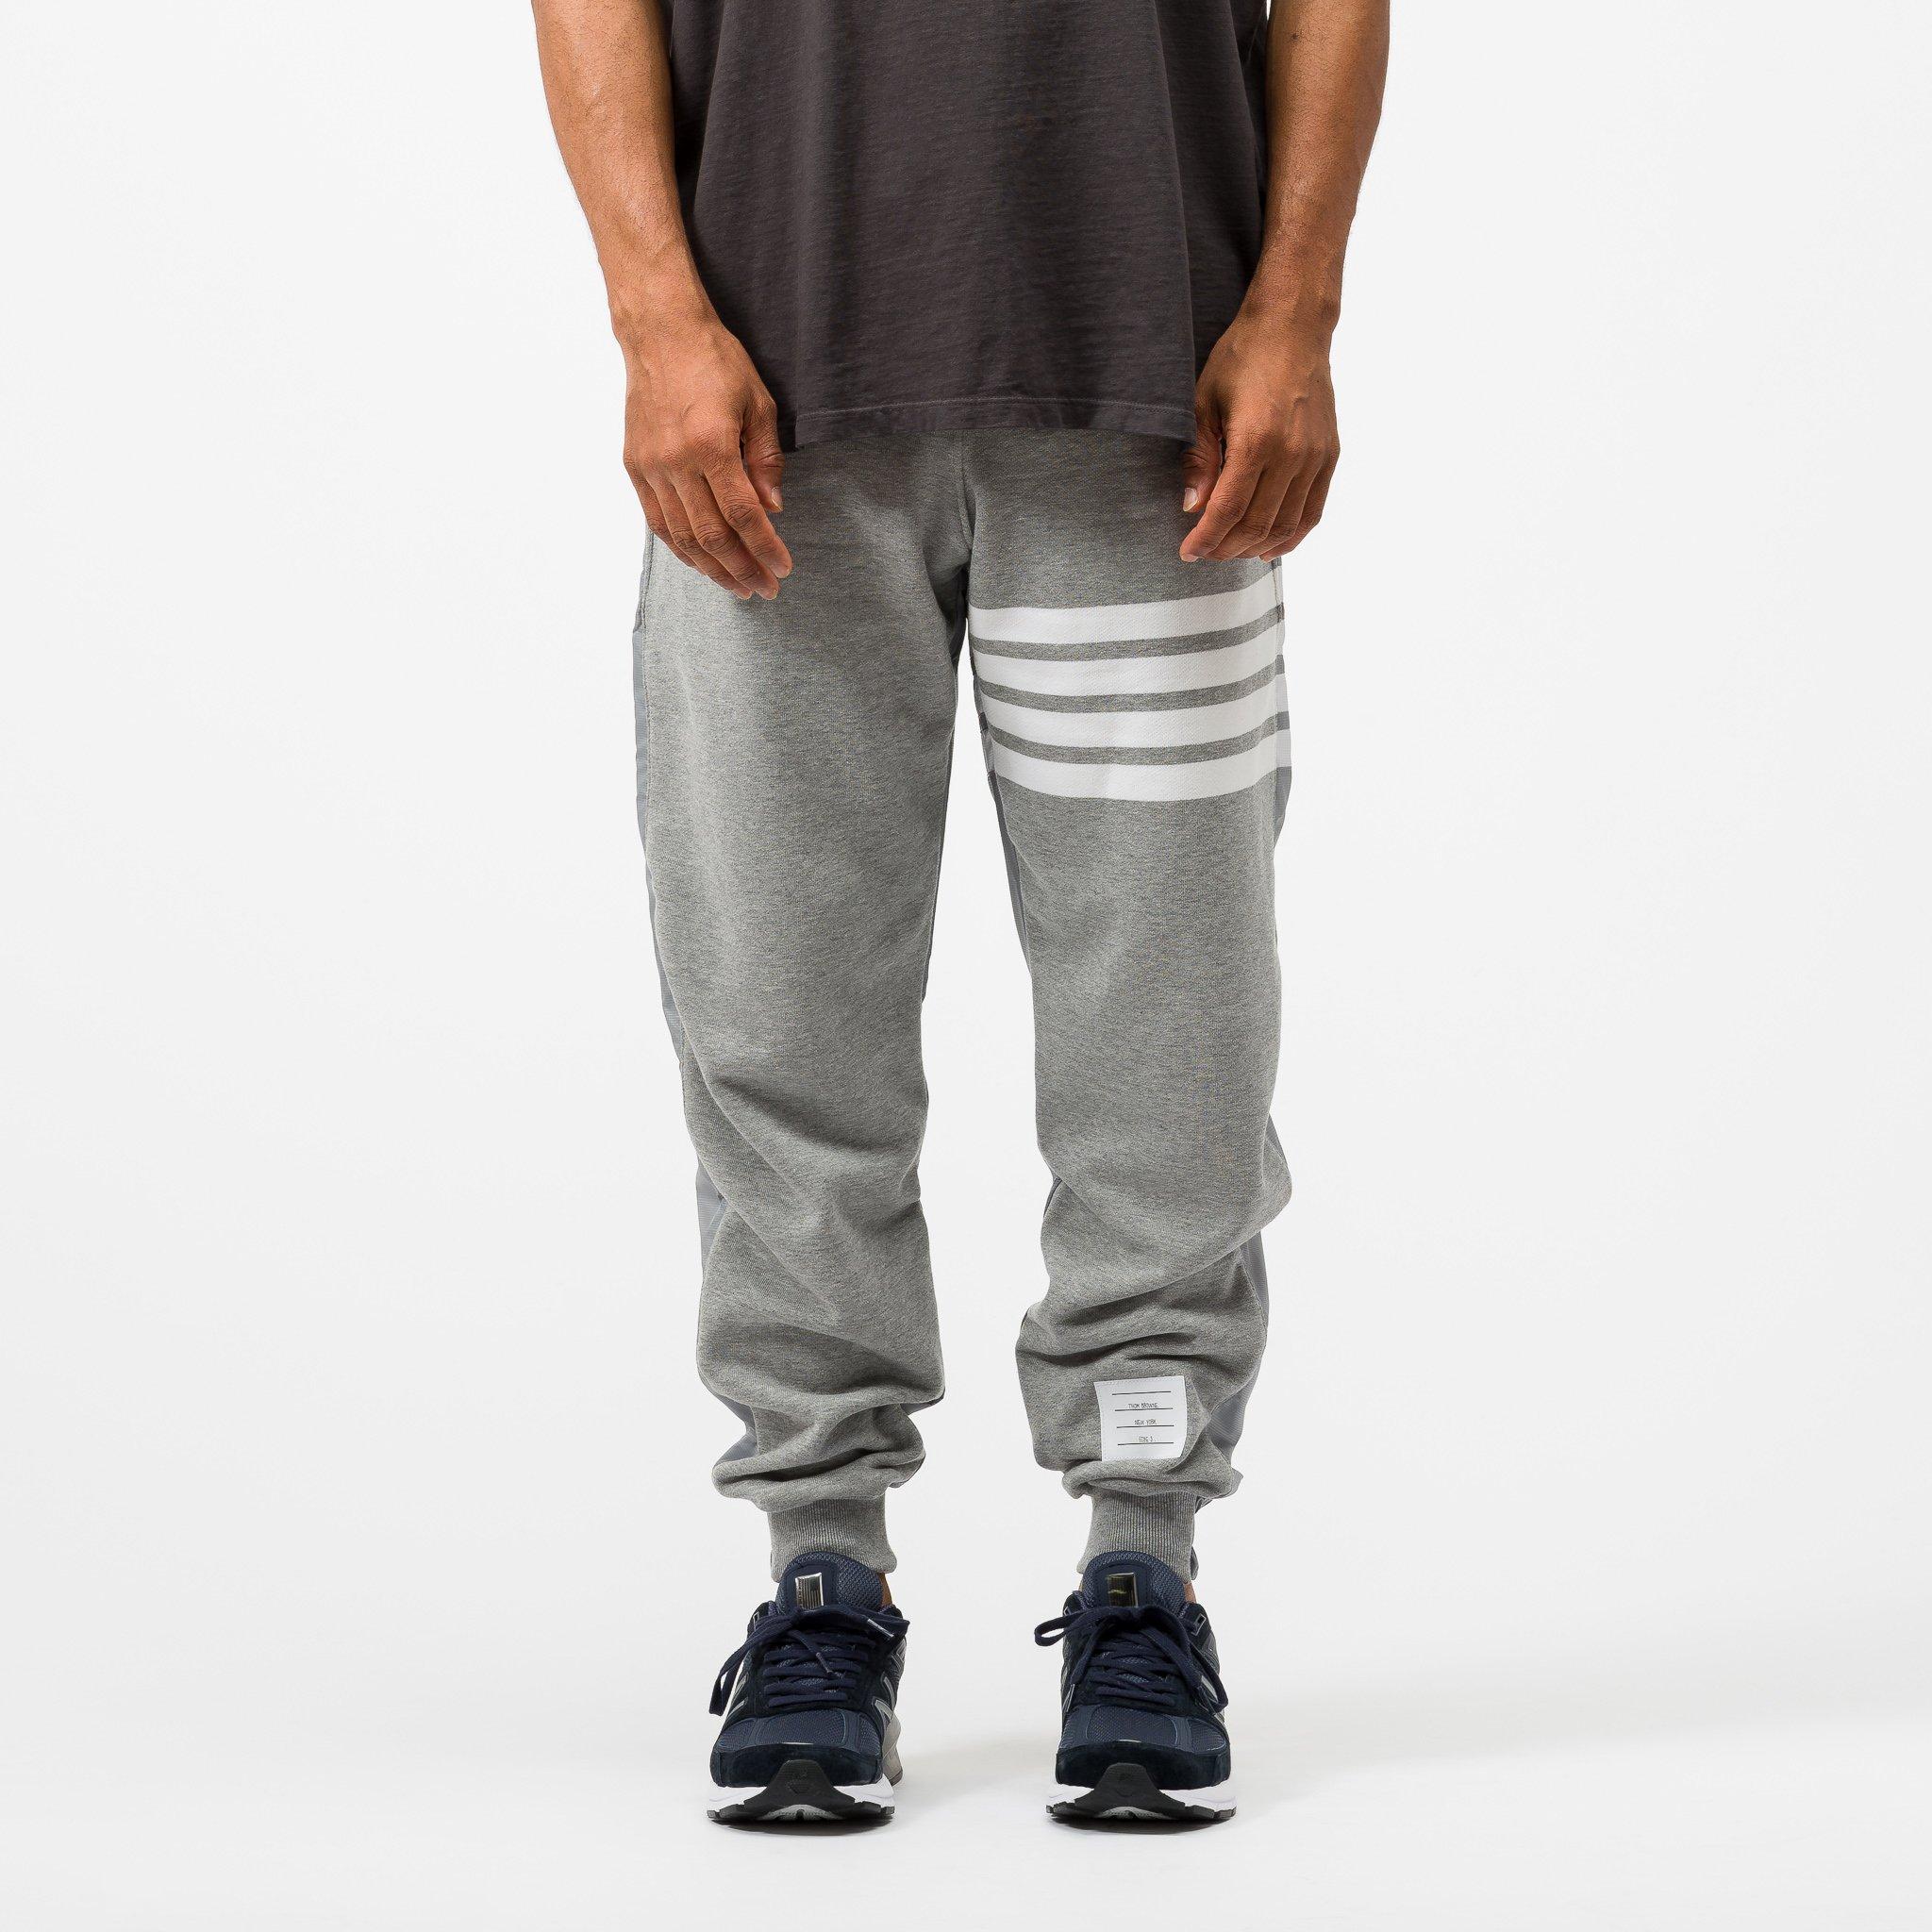 Thom Browne Cotton Half And Half Sweatpants in Grey (Gray) for Men - Lyst